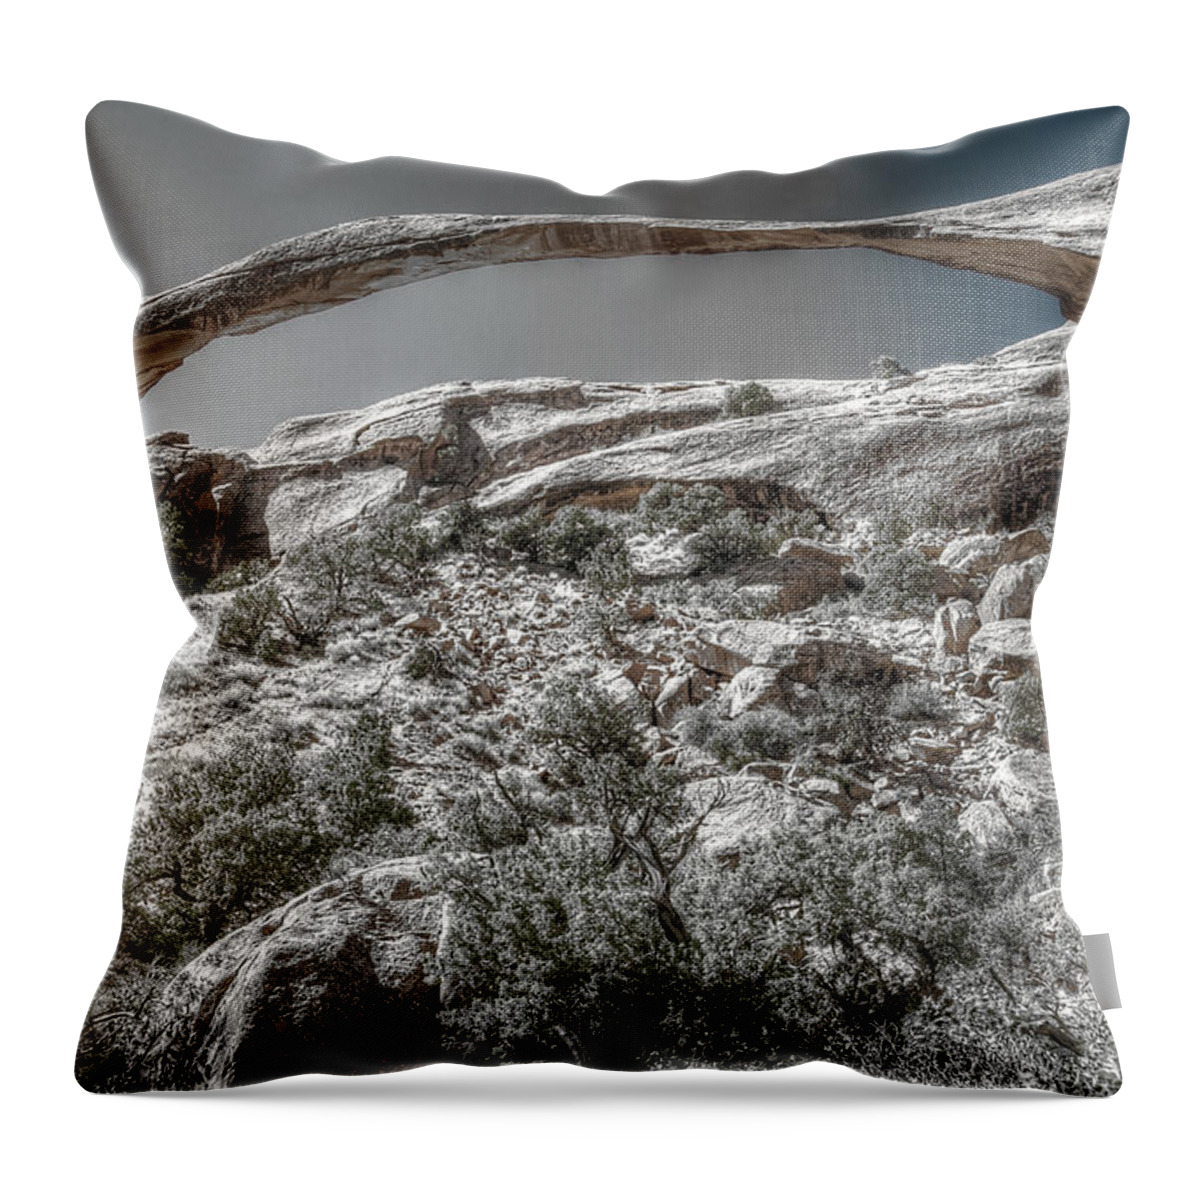 Utah Throw Pillow featuring the photograph Delicate Stone by Richard Gehlbach